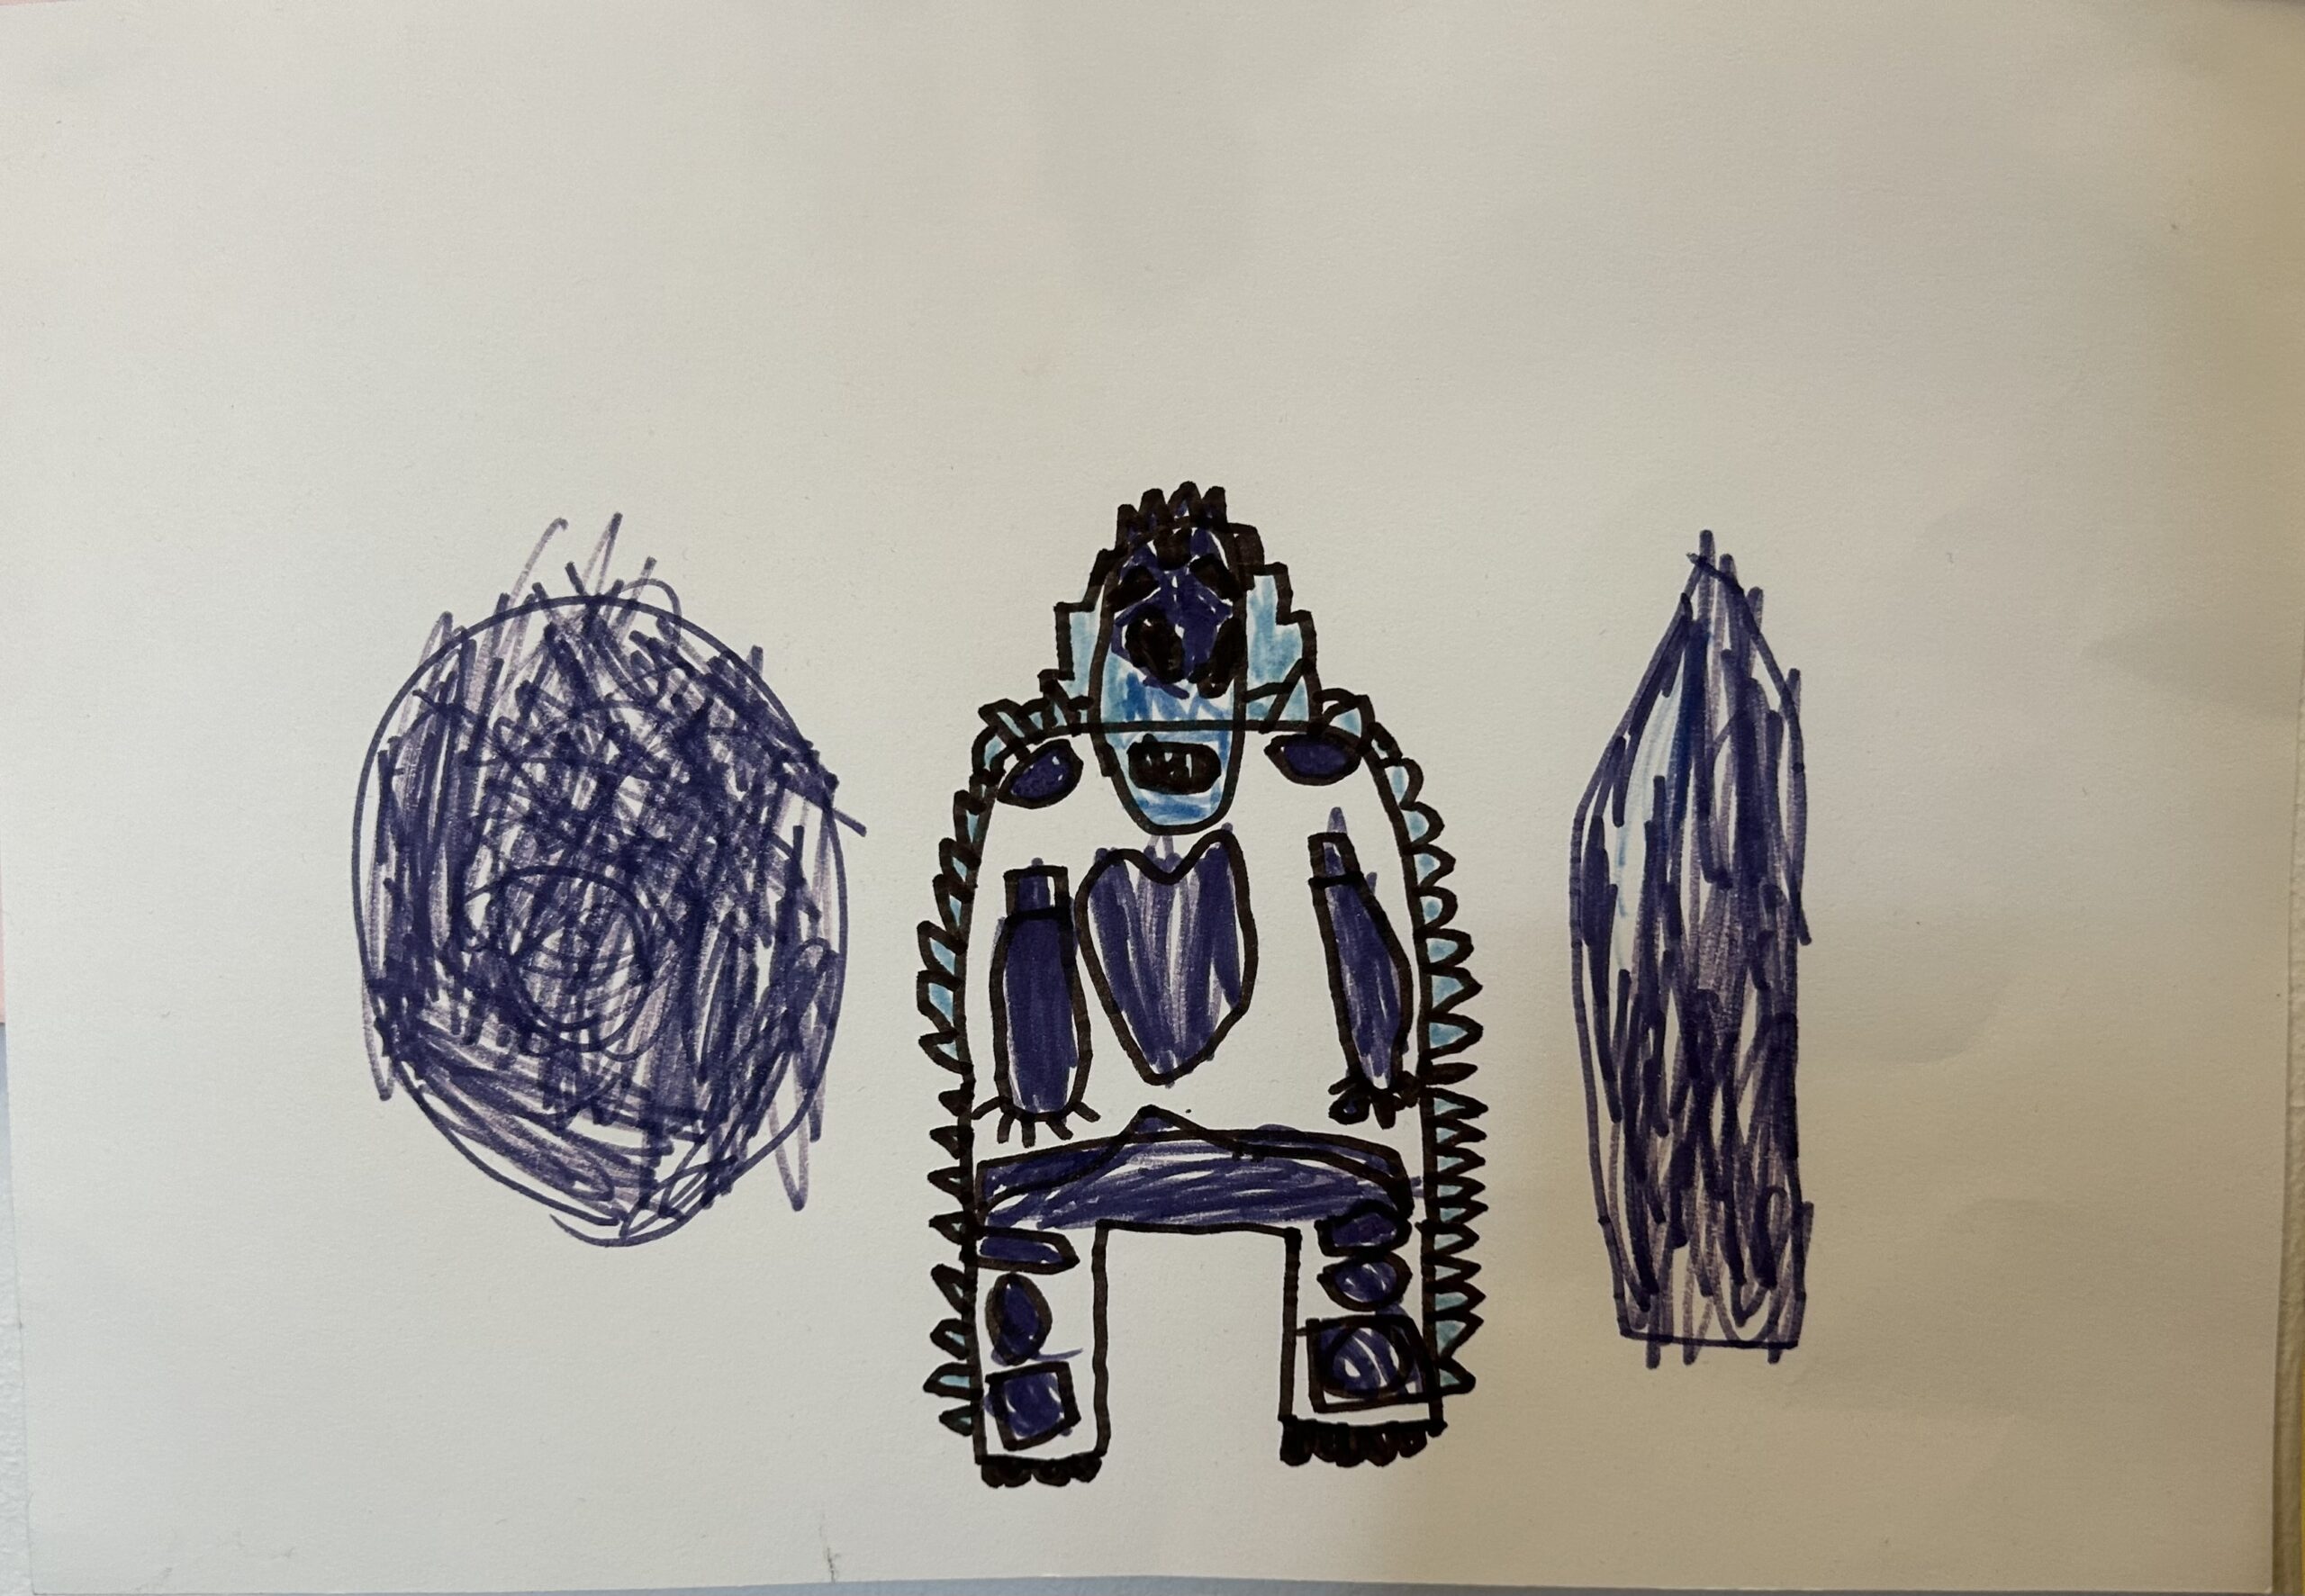 a three part purple drawing on white paper: a purple circle; a purple and black figure that looks a blend between a robot, a person, and a rocket; and a surfboard shaped purple shape.